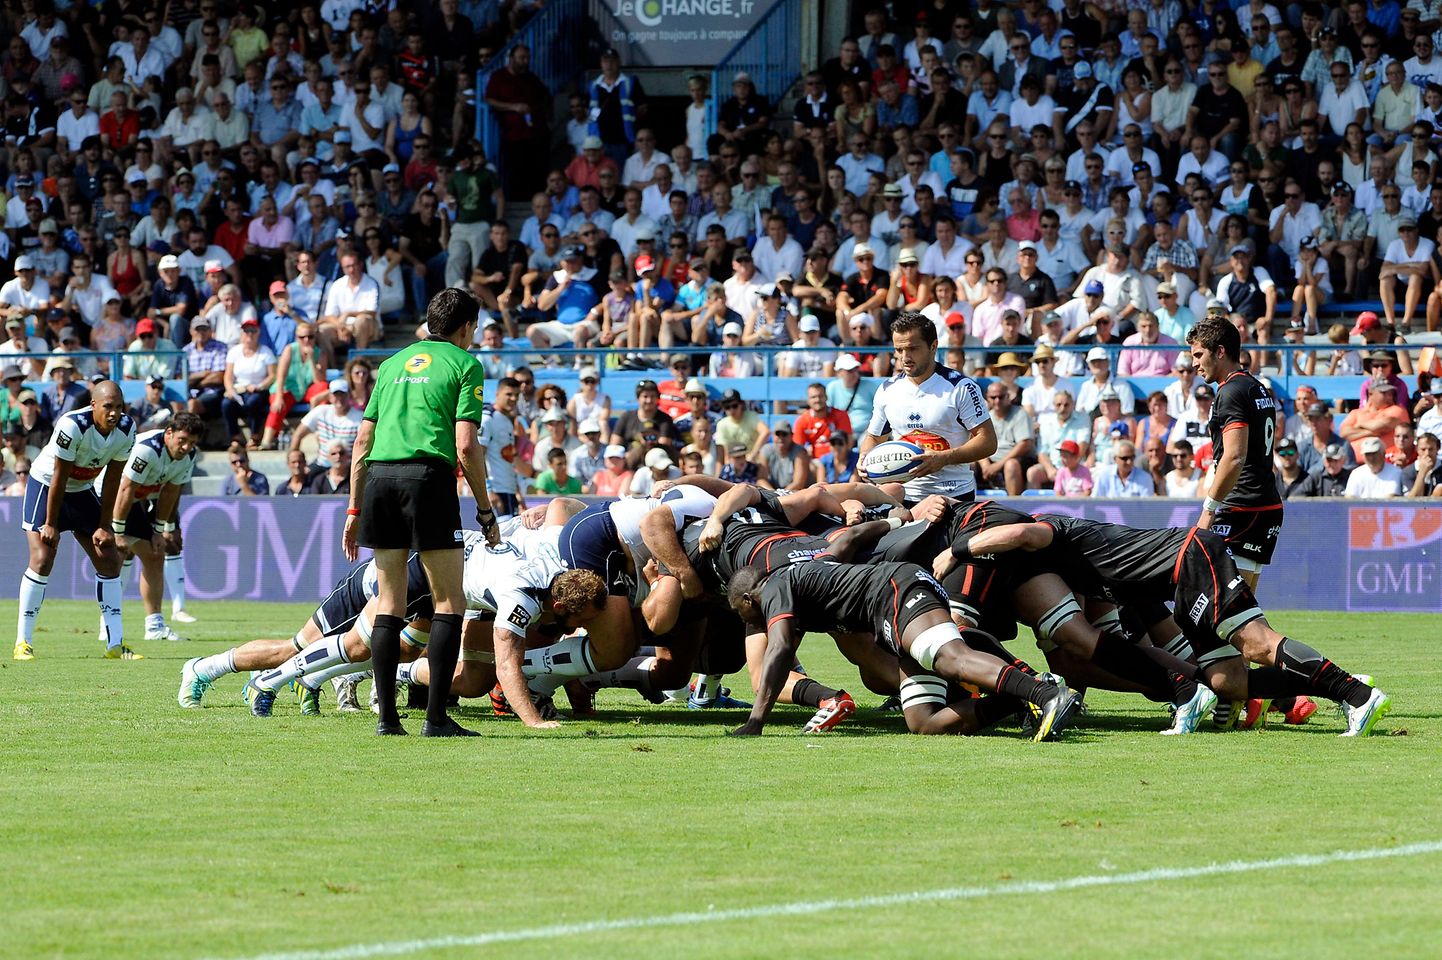 Rugby game: Agen versus Toulouse during the 2nd day of championship